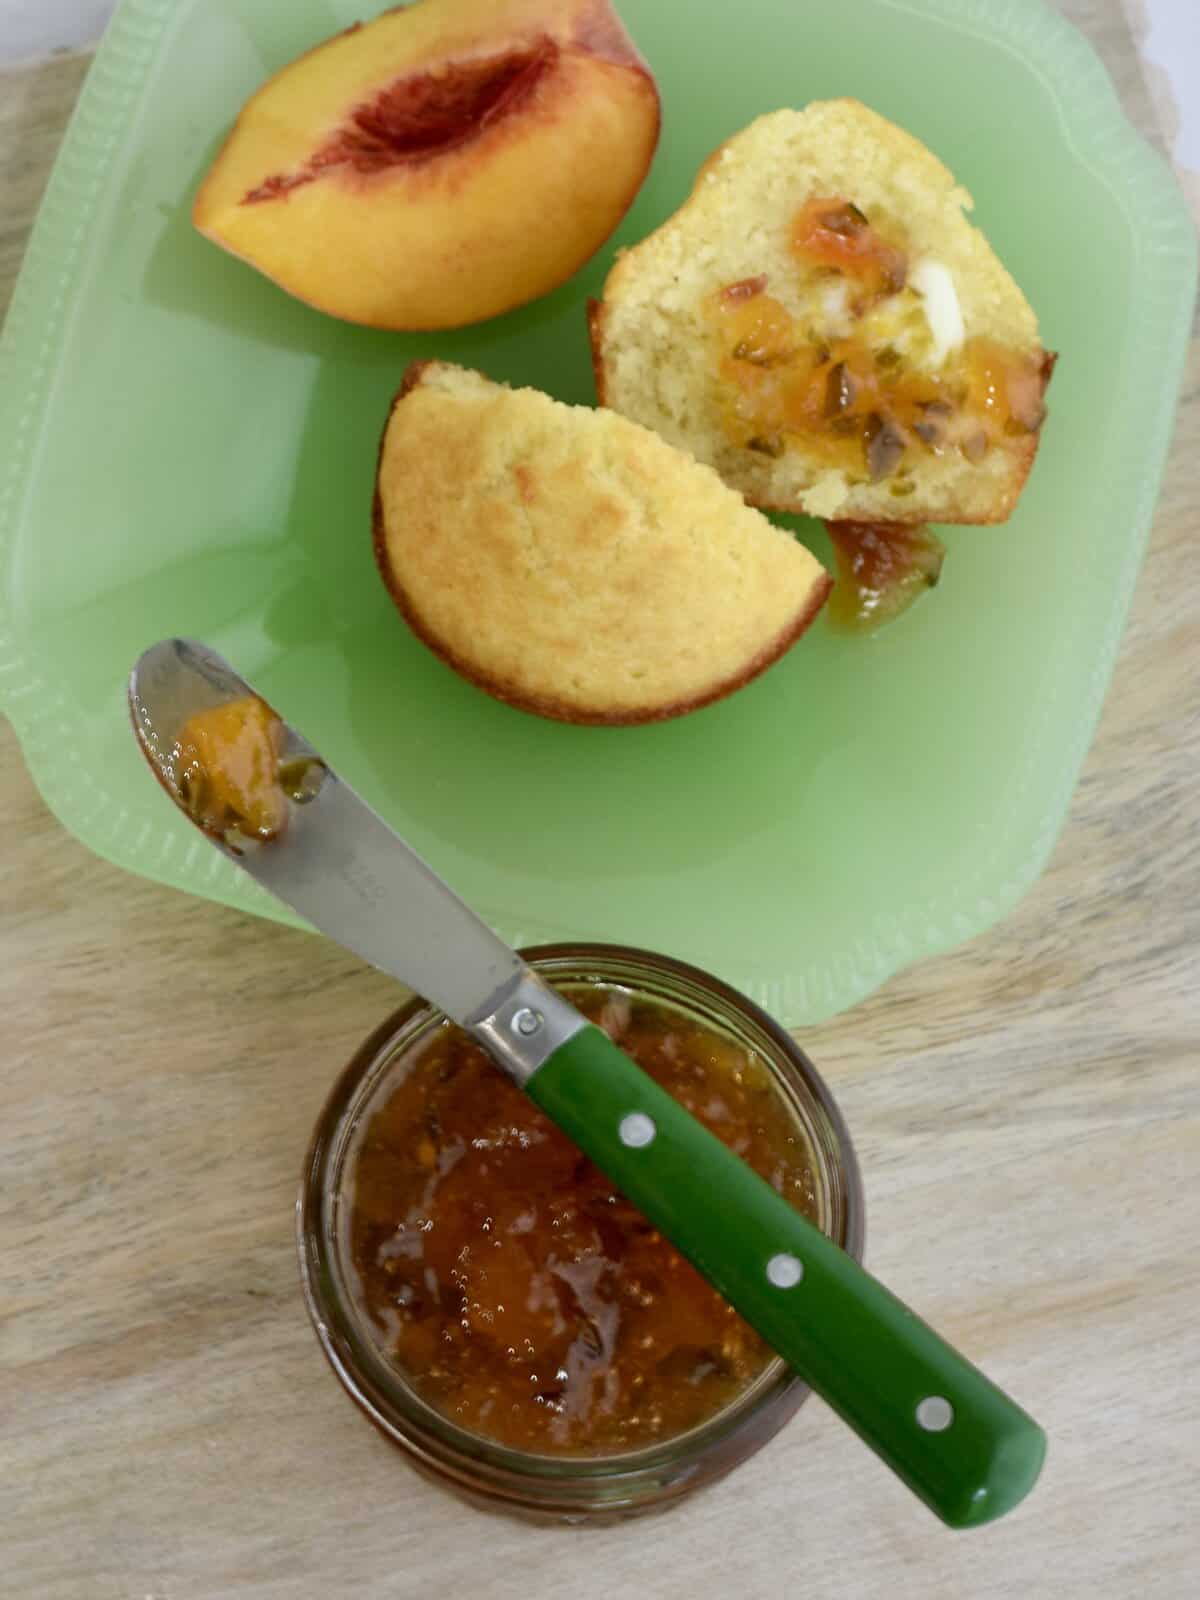 Cornbread muffin with peach pepper jelly on one half; jar of jelly and spreader at the bottom.